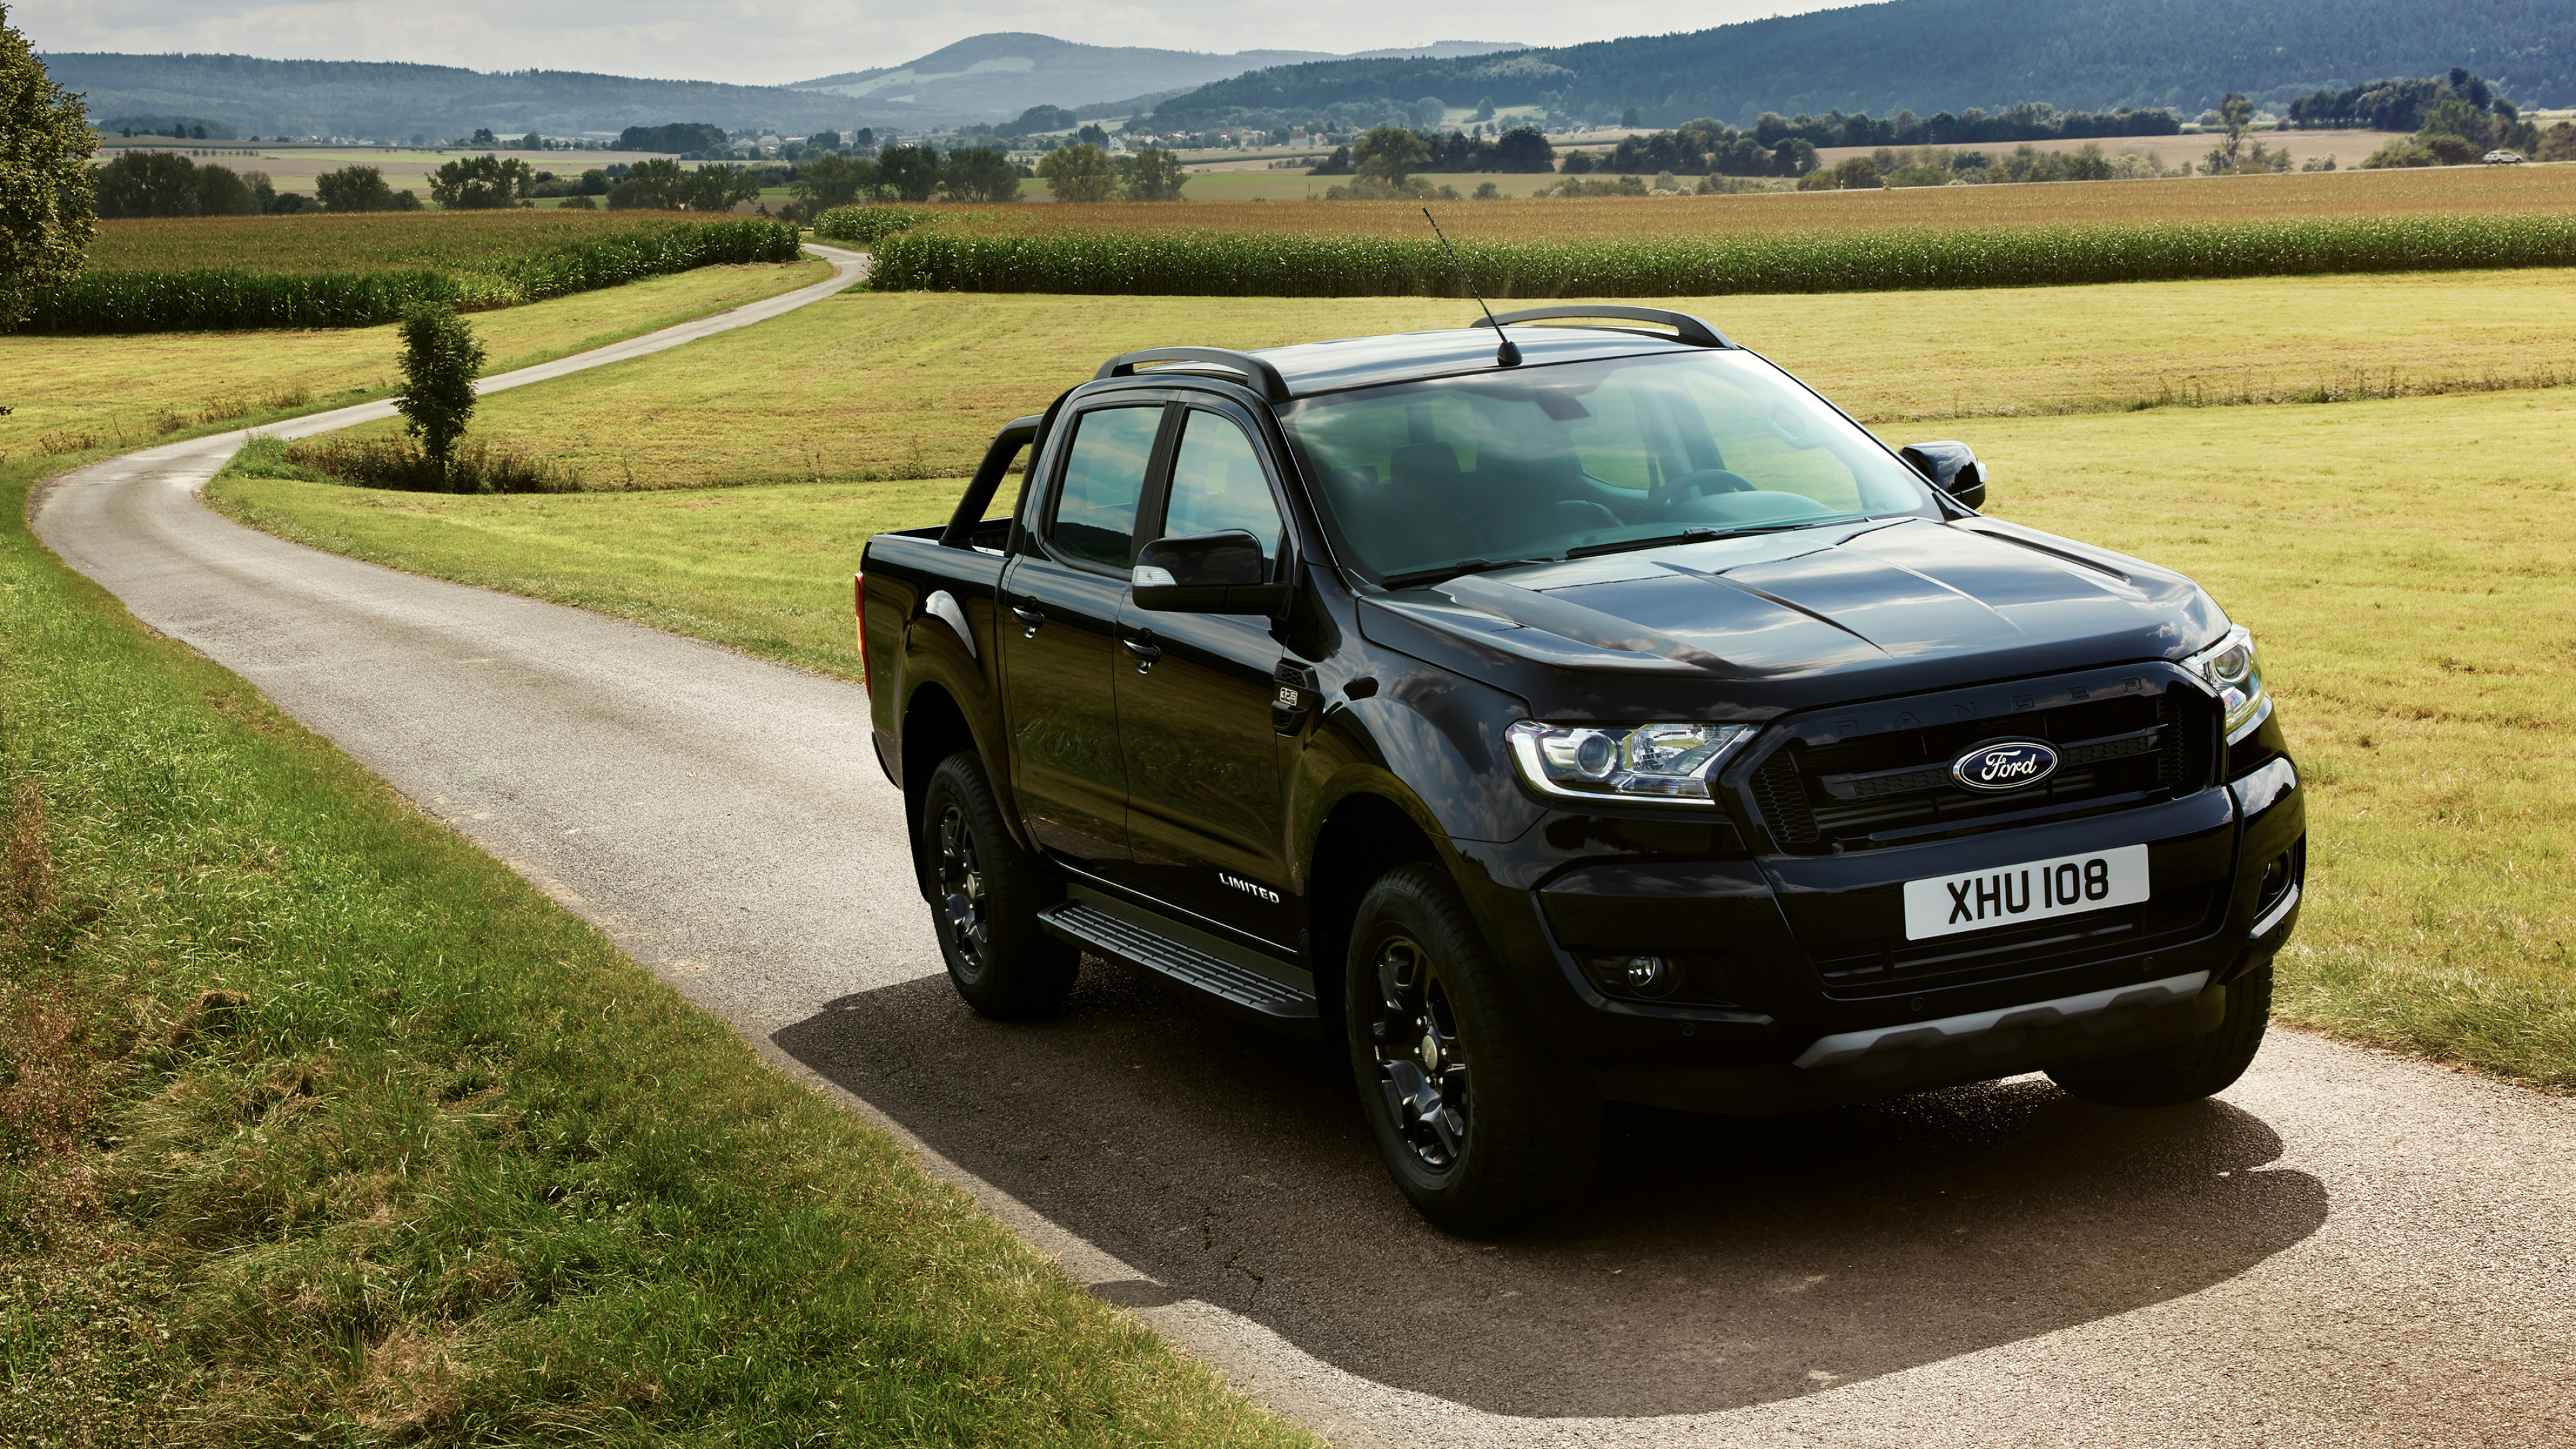 Ford Ranger: The first model based on the T6 platform was introduced in 2011. 3840x2160 4K Wallpaper.